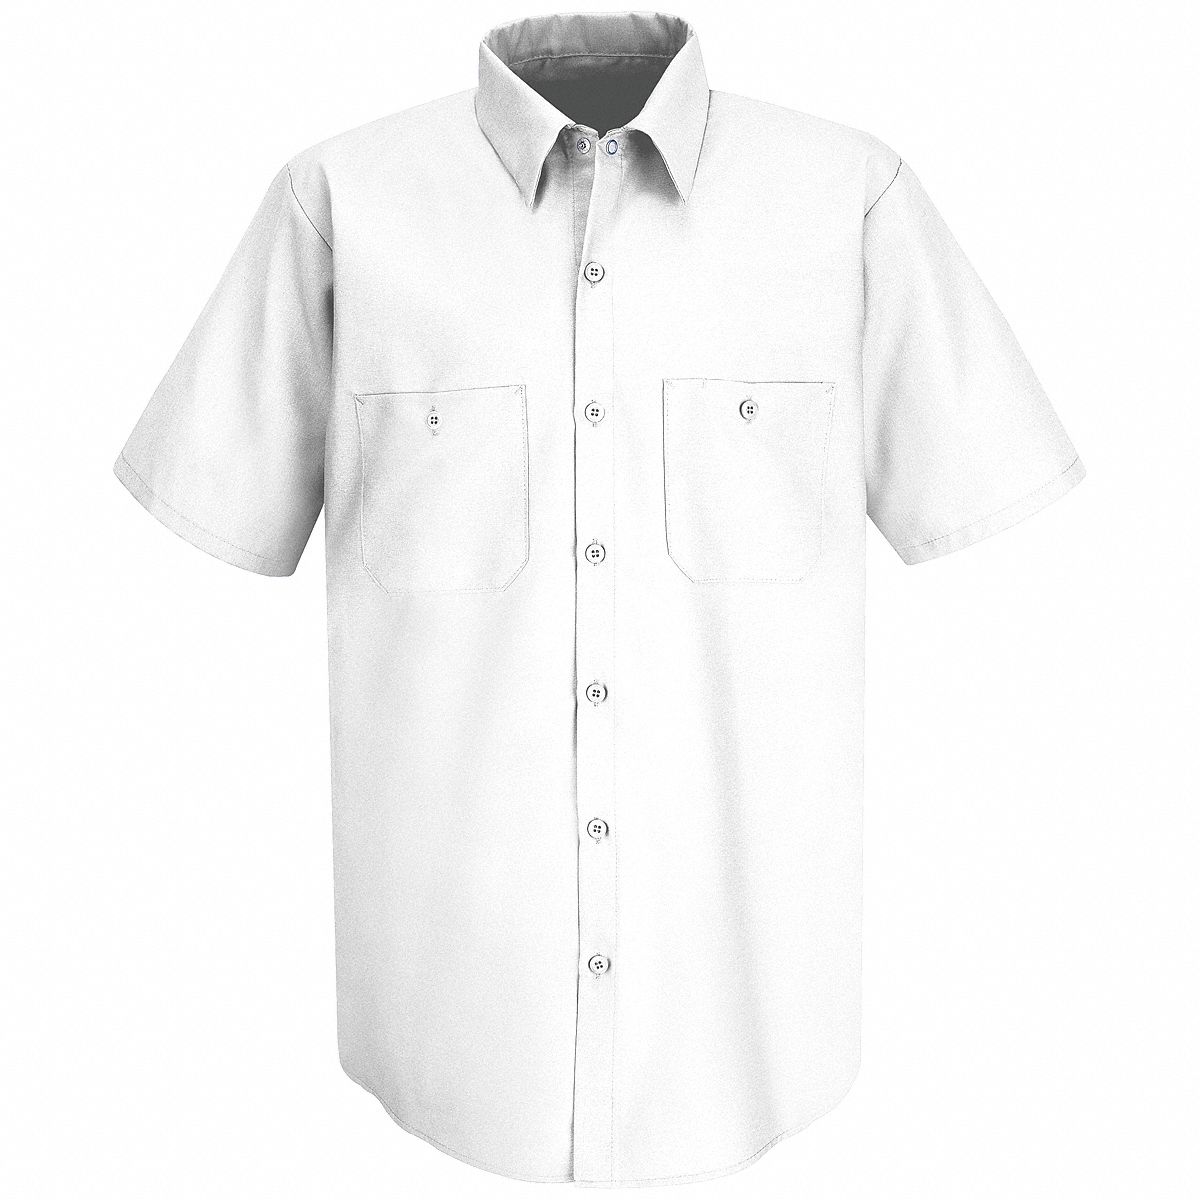 White Short Sleeve Work Shirt, S Size, 65% Polyester, 32 1/2 Inch To 36 Inch Chest Size